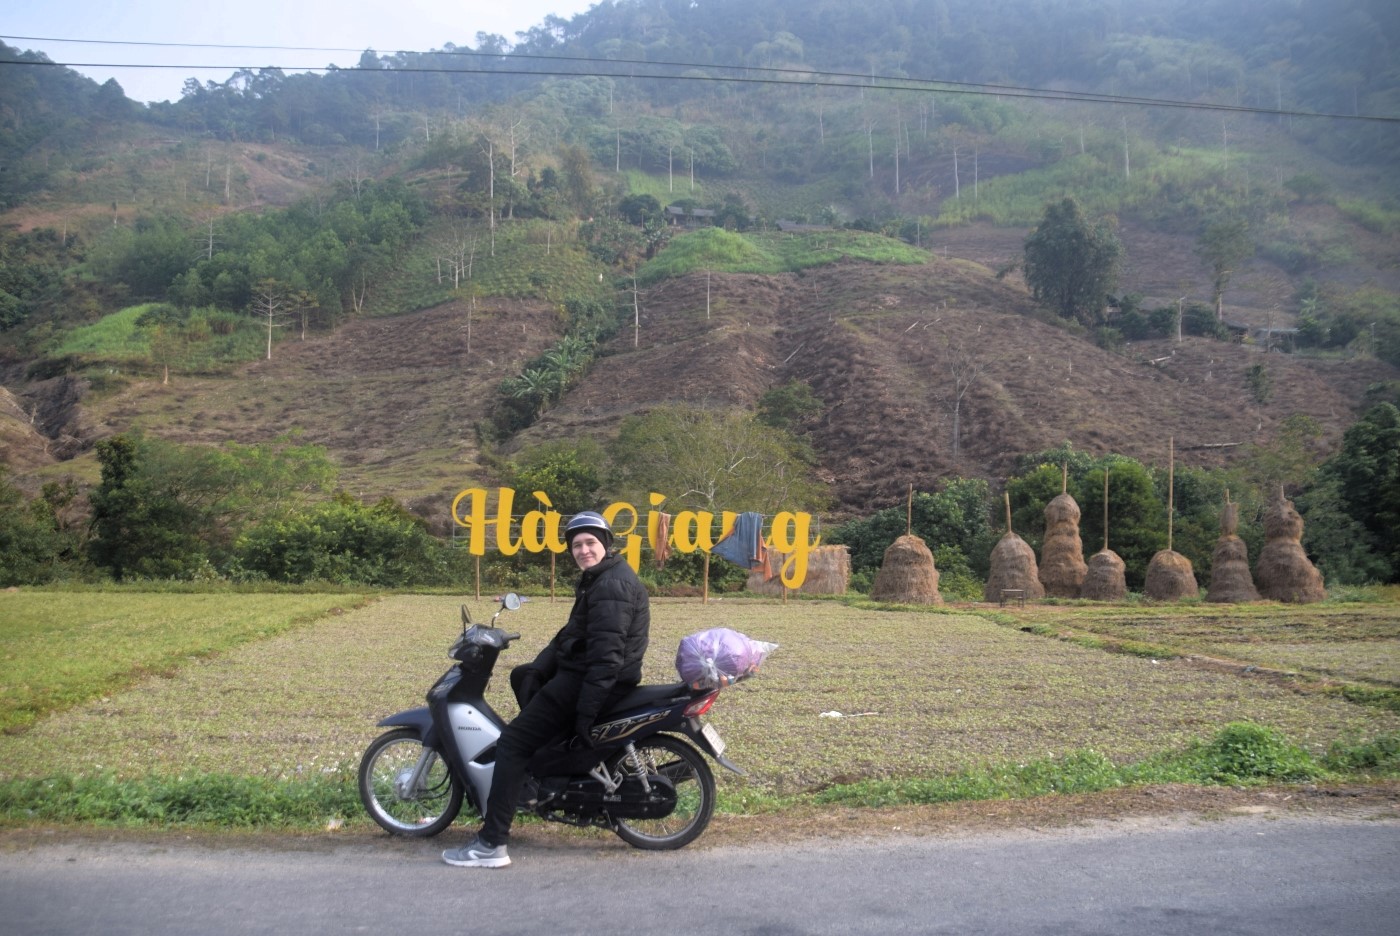 Jake on a motorbike next to the Ha Giang sign